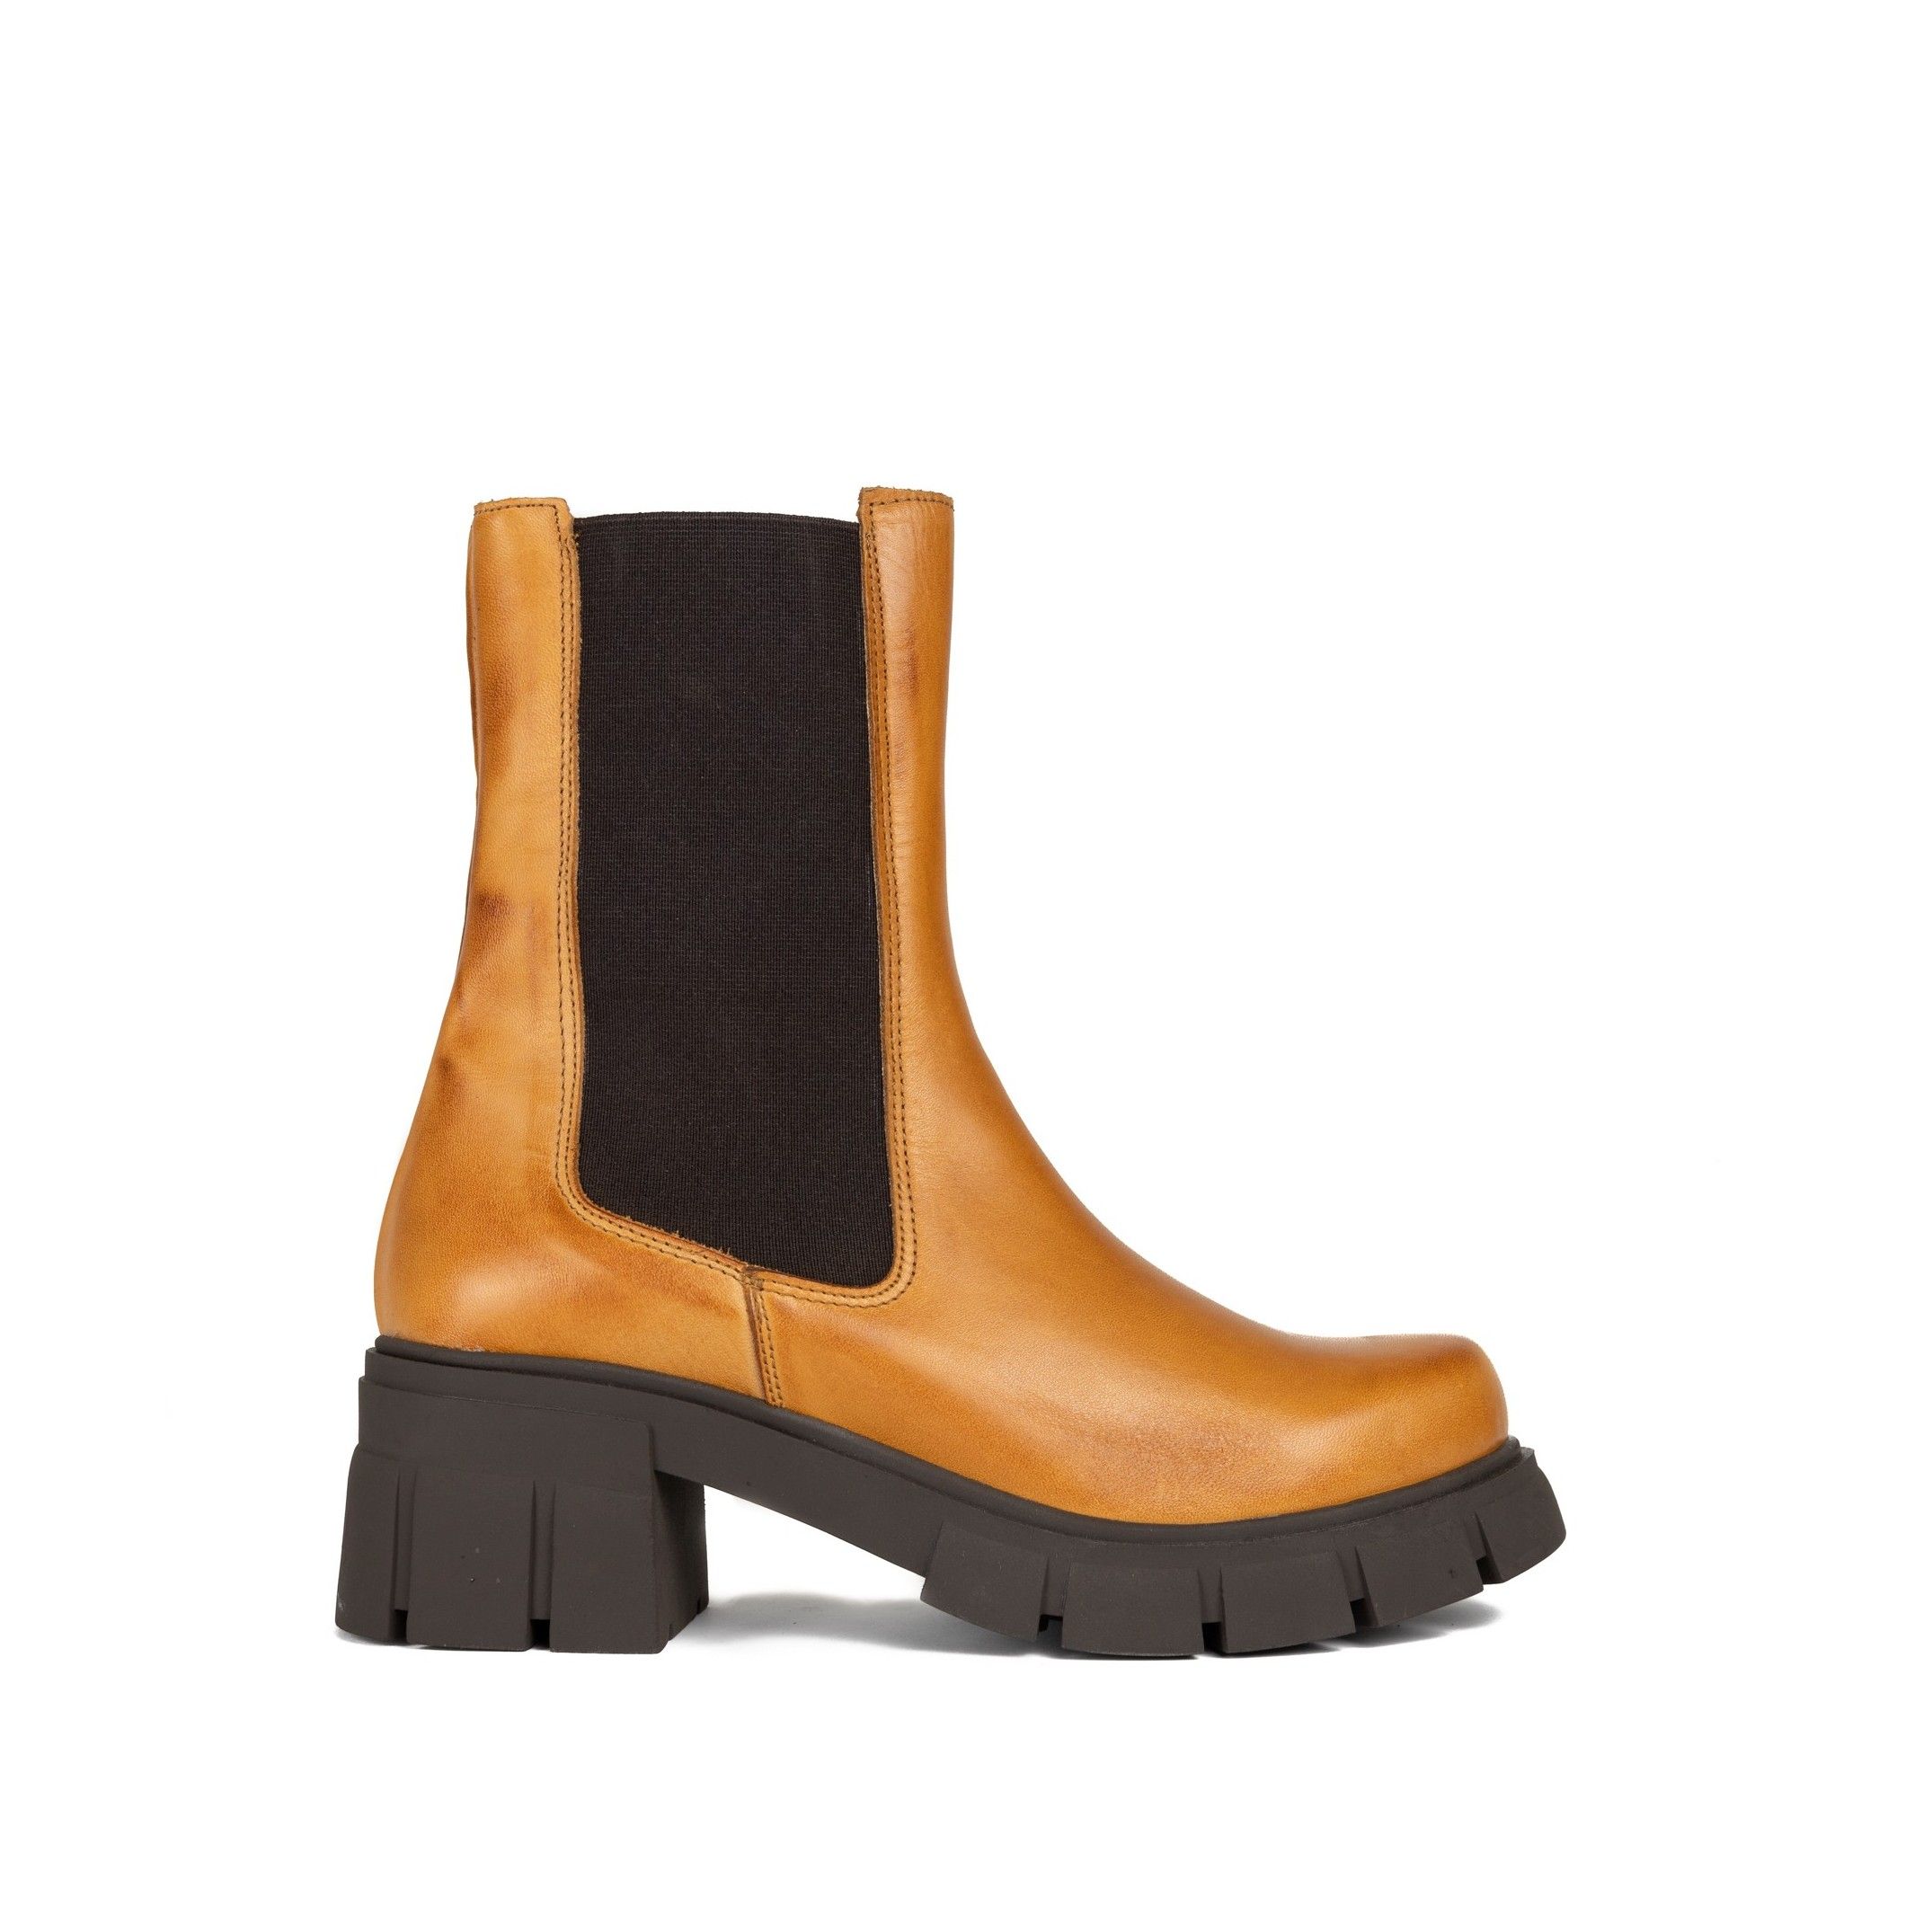 Chelsea track boot by María Barceló. Closure: elastic. Exterior: leather. Interior: leather. Insole: leather. Sole: TR slip resistant. Platform: 2 cm. Heel: 6 cm. Shaft height: 18 cm. Made in Spain.